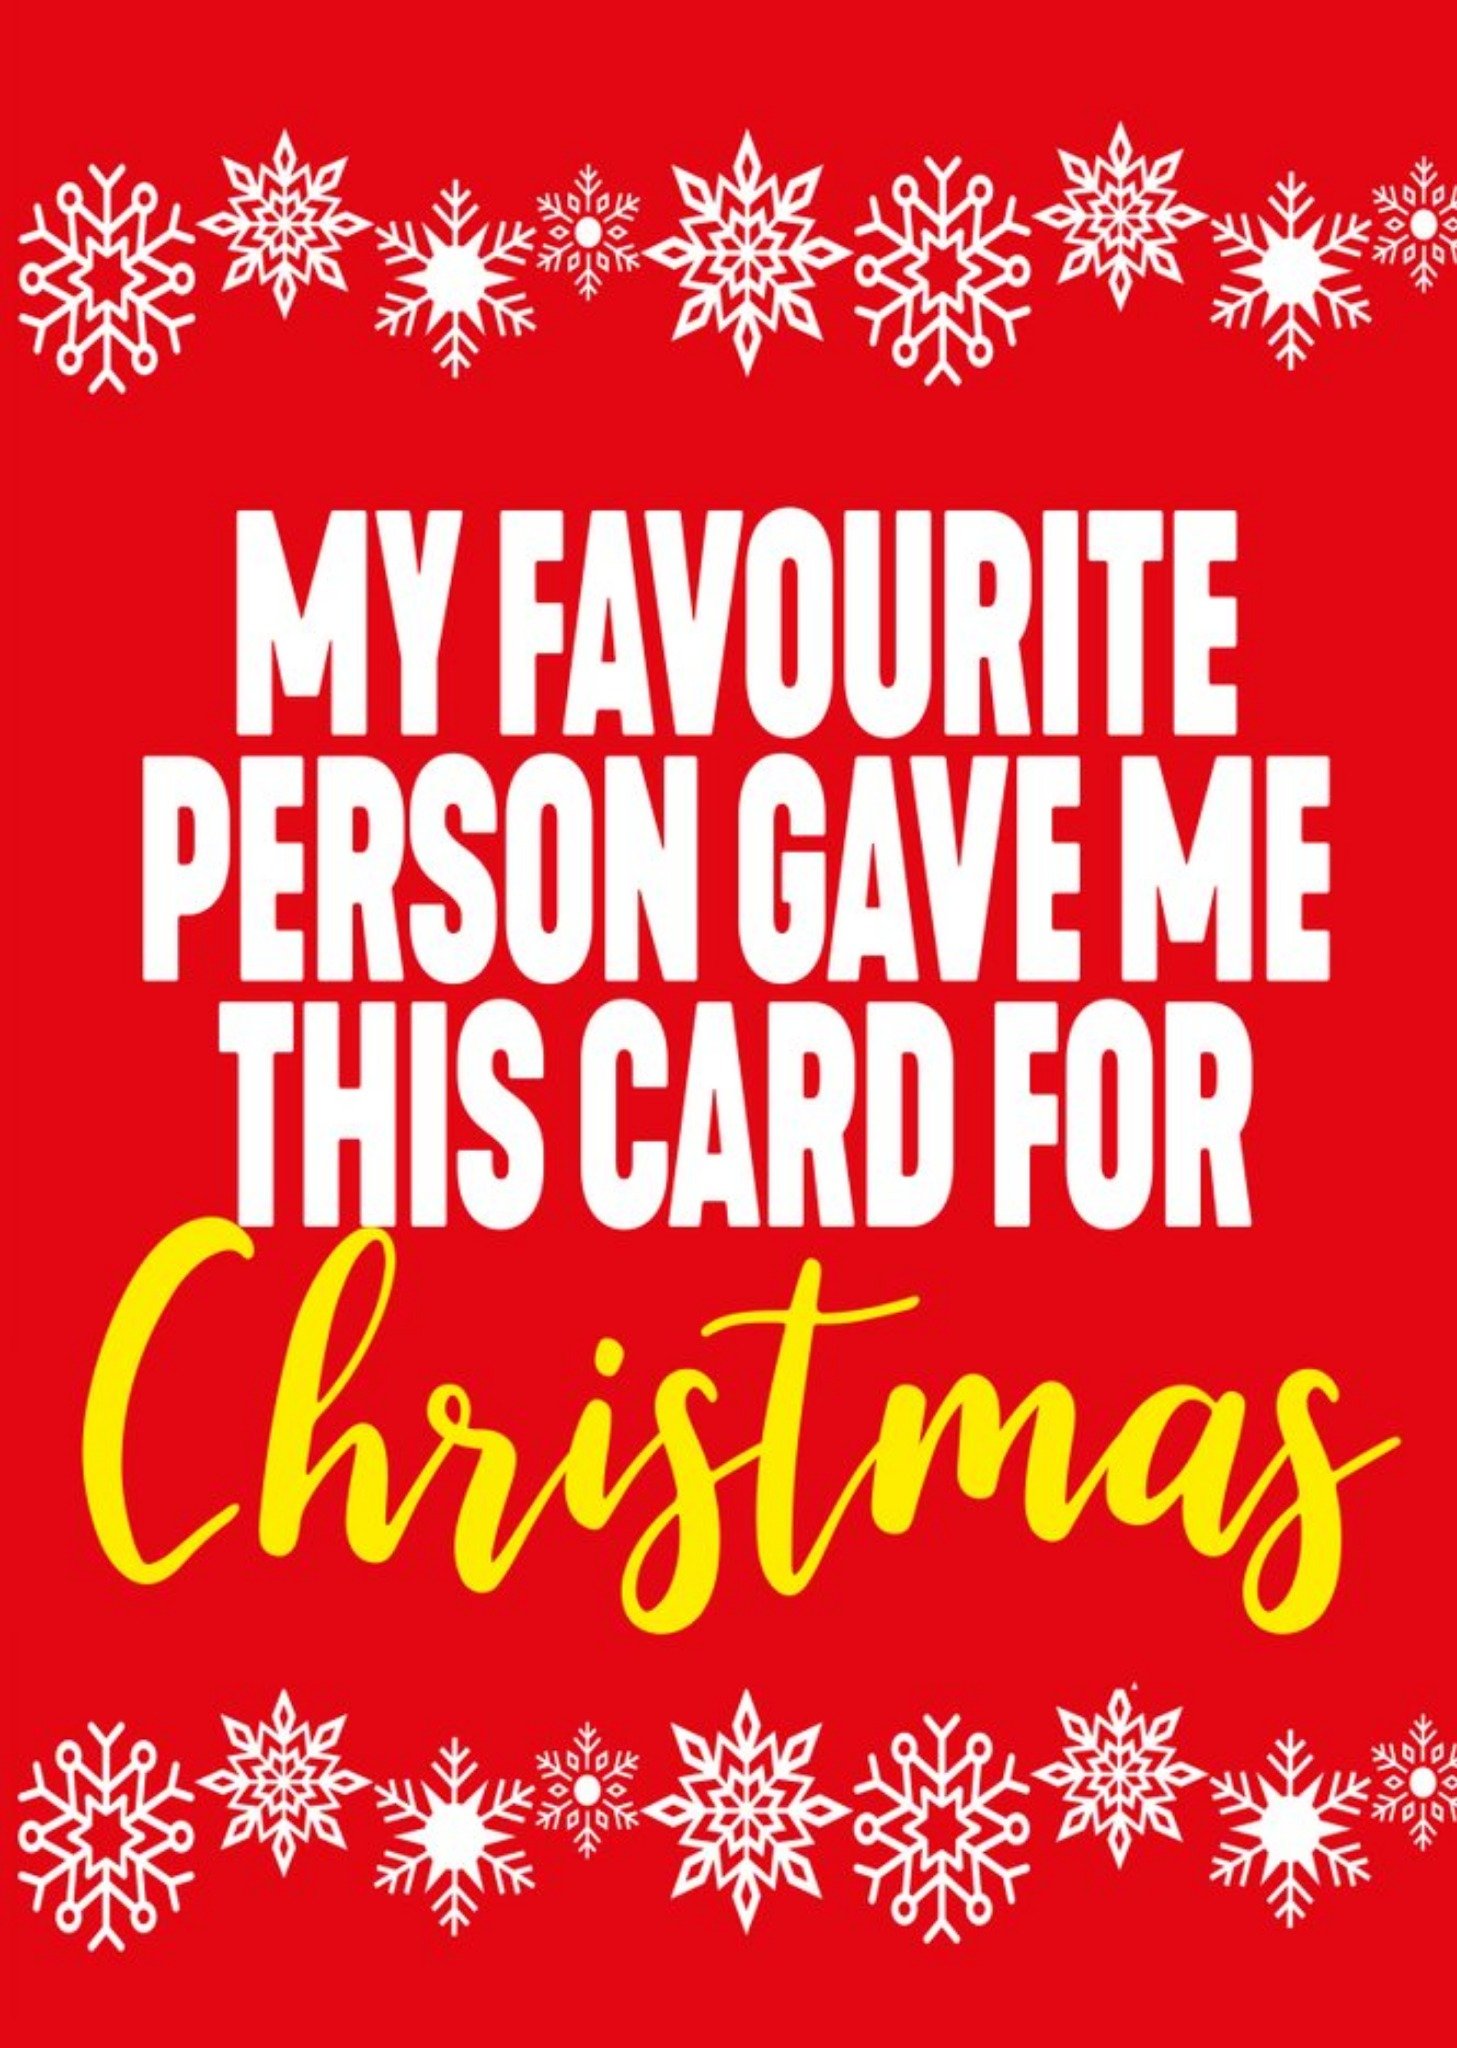 Filthy Sentiments Being Related To Me Is The Only Gift You Need Merry Christmas Funny Christmas Card